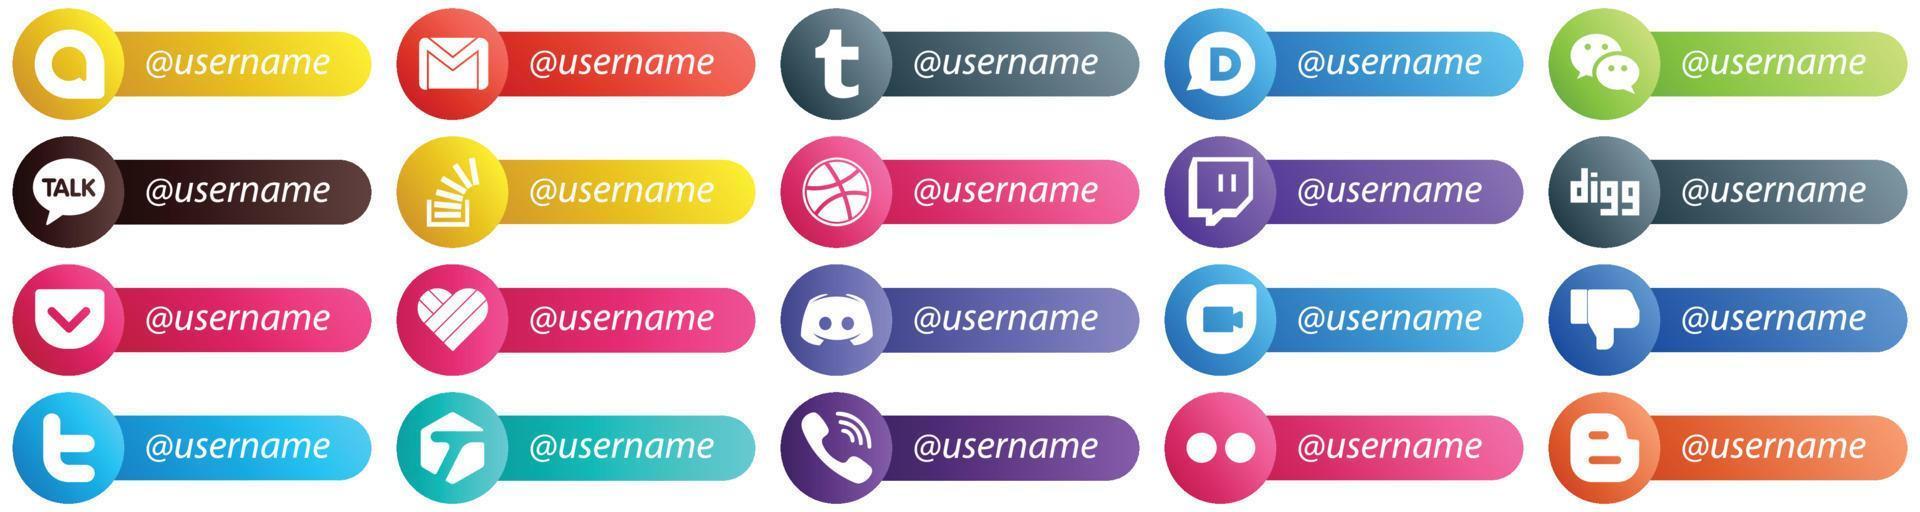 20 Unique Follow me Social Network Platform Card Style Icons such as likee. digg. kakao talk. twitch and overflow icons. Eye catching and high definition vector